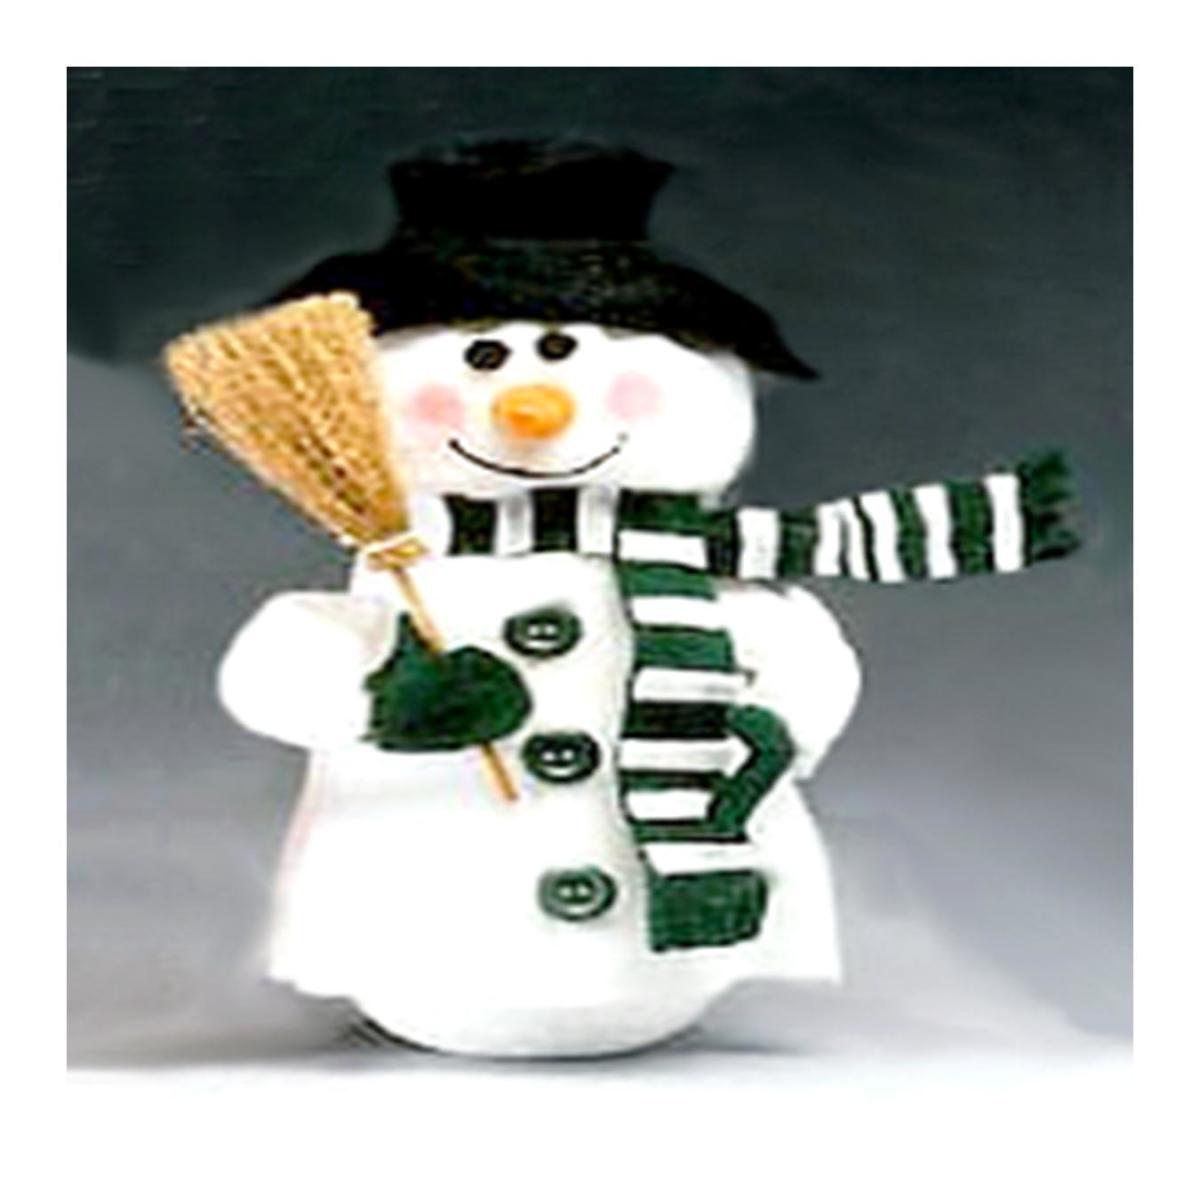 Adorable snowman wobbler is just one of the great patterns on this site.